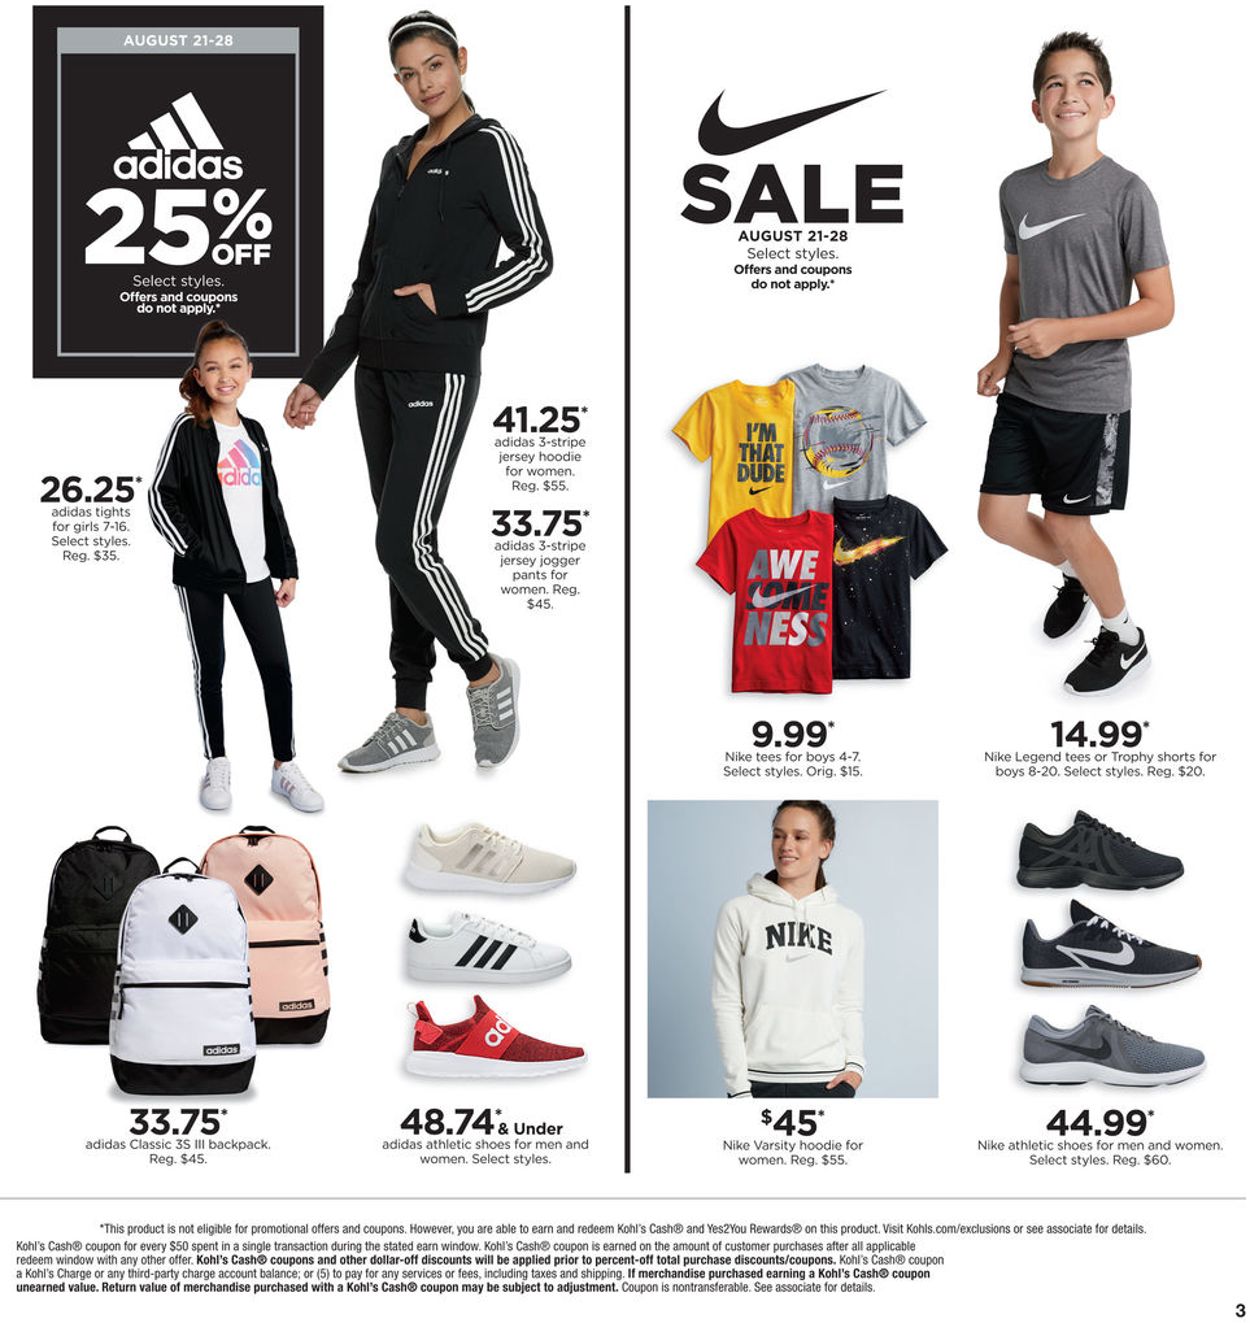 Kohl's Current weekly ad 08/21 08/28/2019 [3] frequent